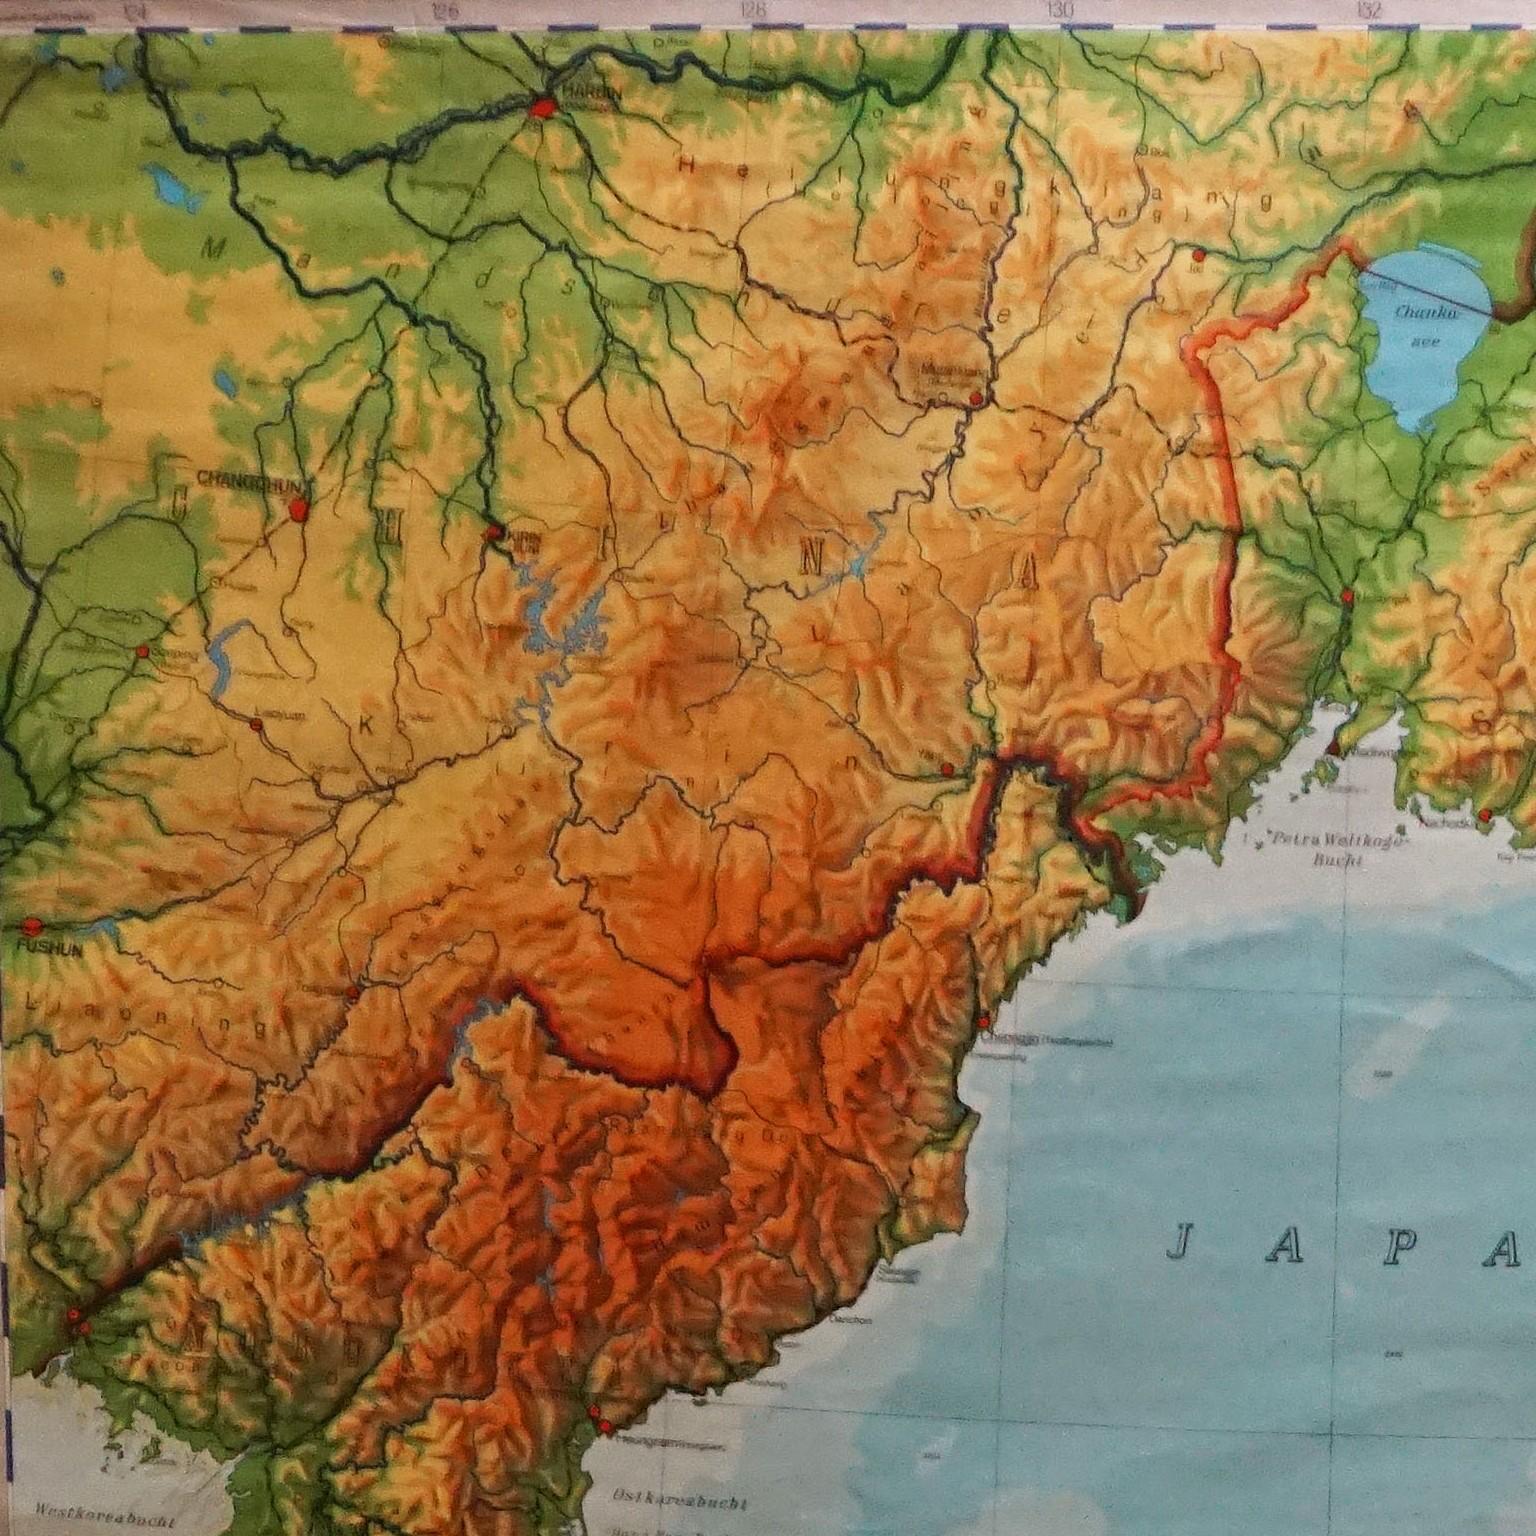 A decorative country core pull-down map depicting Japan and Korea. Published by Haack-Paincke Justus Perthes. Colorful print on paper reinforced with canvas.
Measurements:
Width 199.50 cm (78.54 inch)
Height 194 cm (76.38 inch)

The measurements